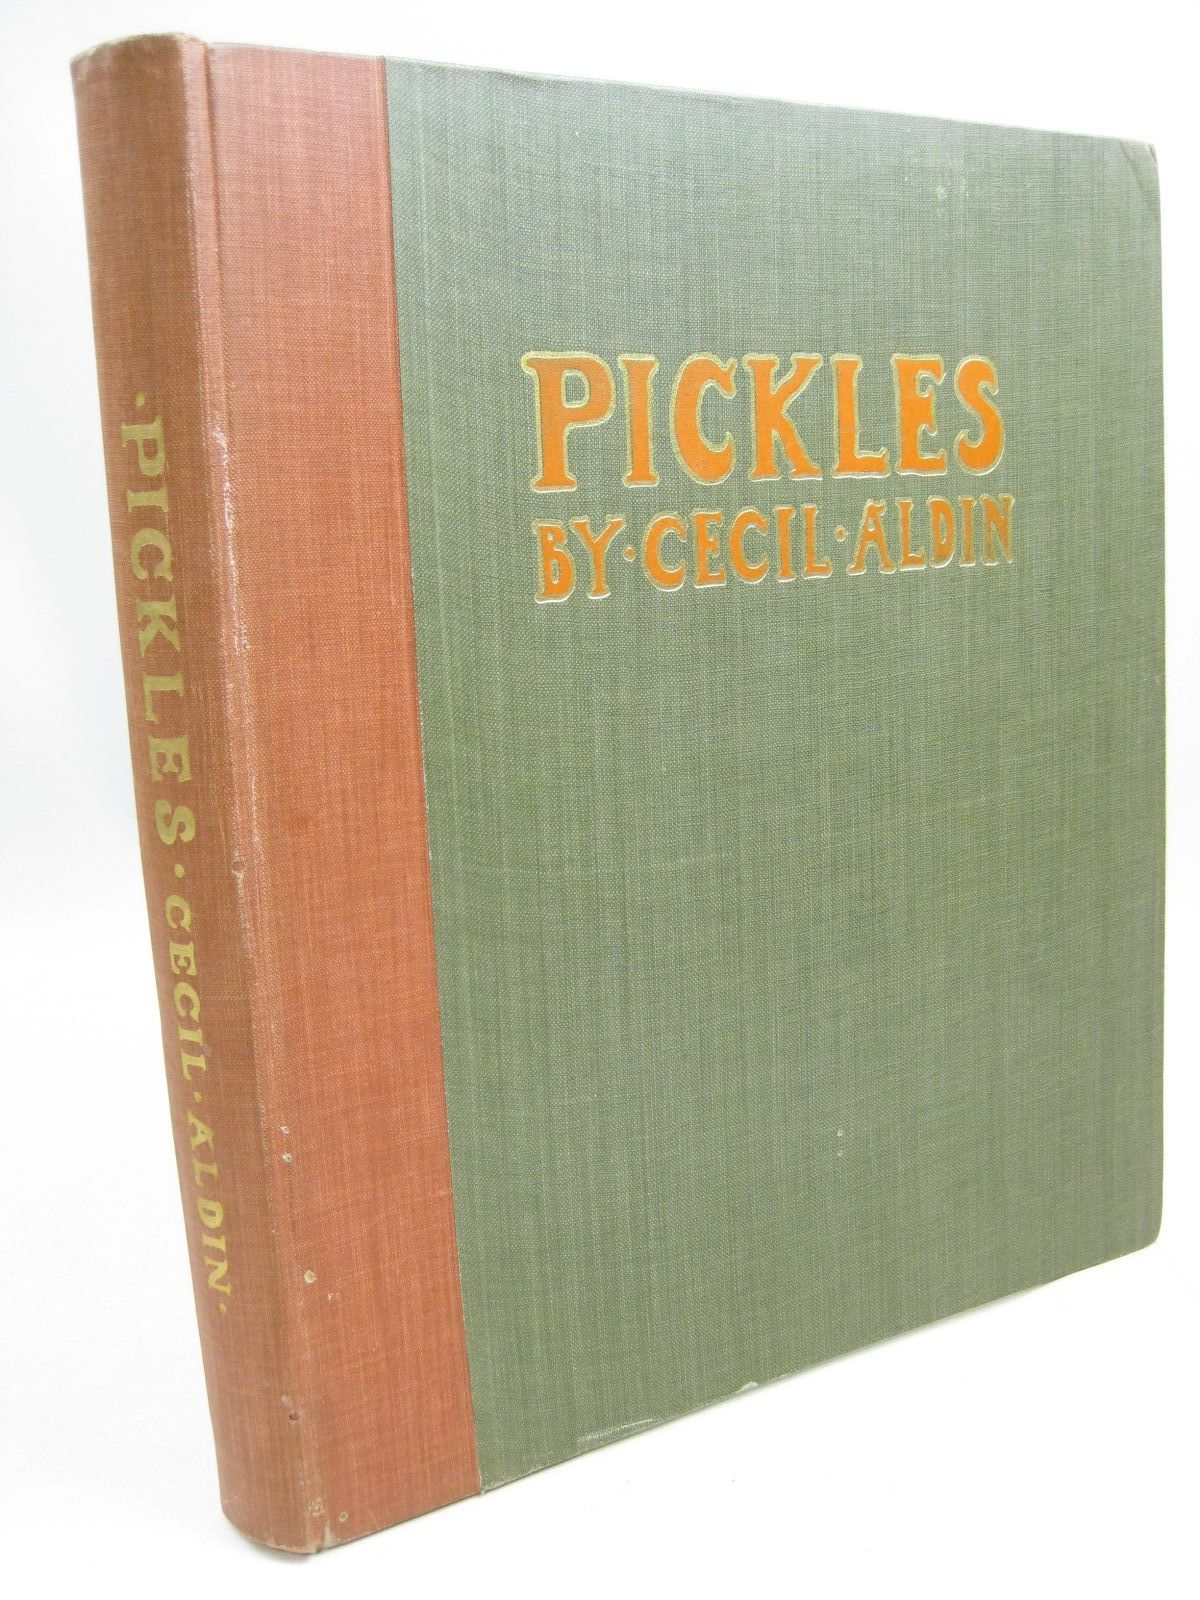 Photo of PICKLES written by Aldin, Cecil illustrated by Aldin, Cecil published by Henry Frowde, Hodder & Stoughton (STOCK CODE: 1315489)  for sale by Stella & Rose's Books